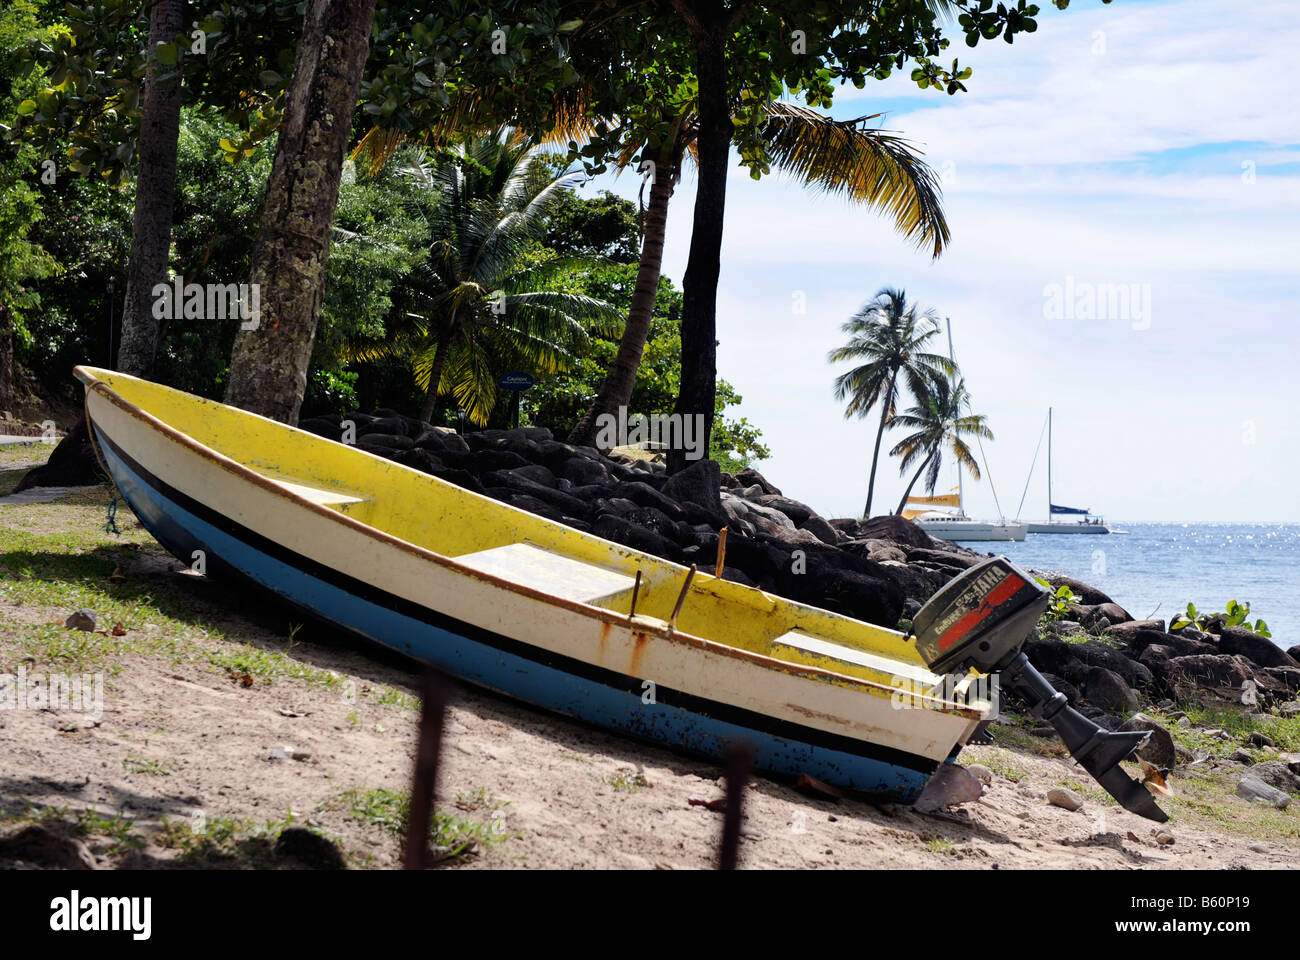 A SMALL FISHING BOAT IN THE COLOURS OF THE ST LUCIAN FLAG BY FORBIDDEN BEACH AT THE JALOUSIE PLANTATION RESORT ST LUCIA Stock Photo